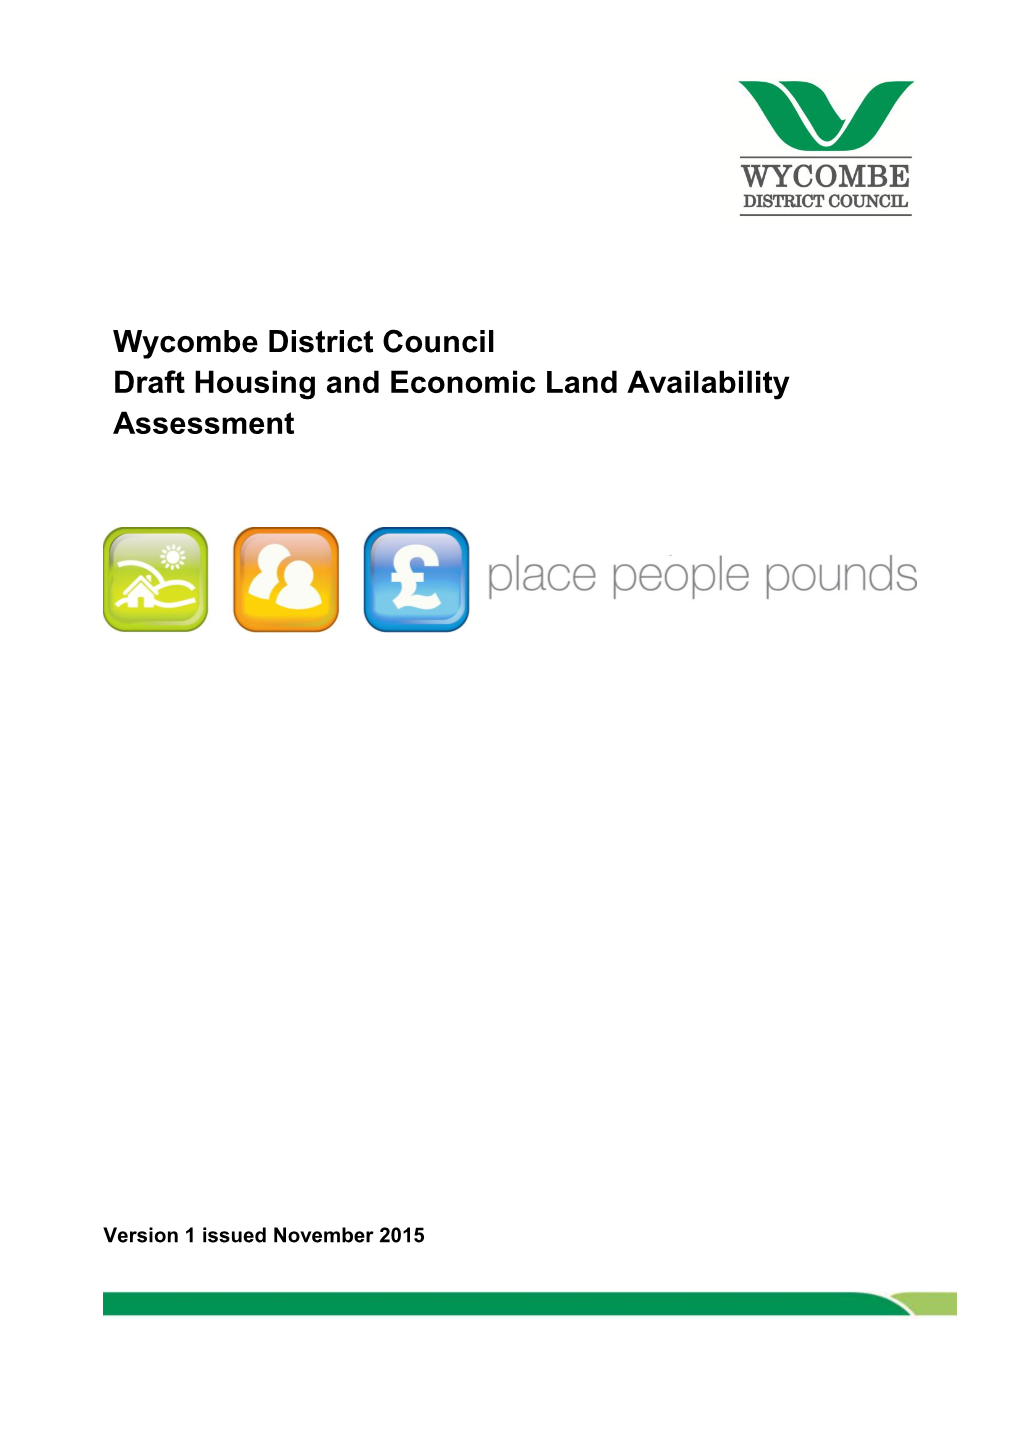 Draft Housing and Economic Land Availability Assessment